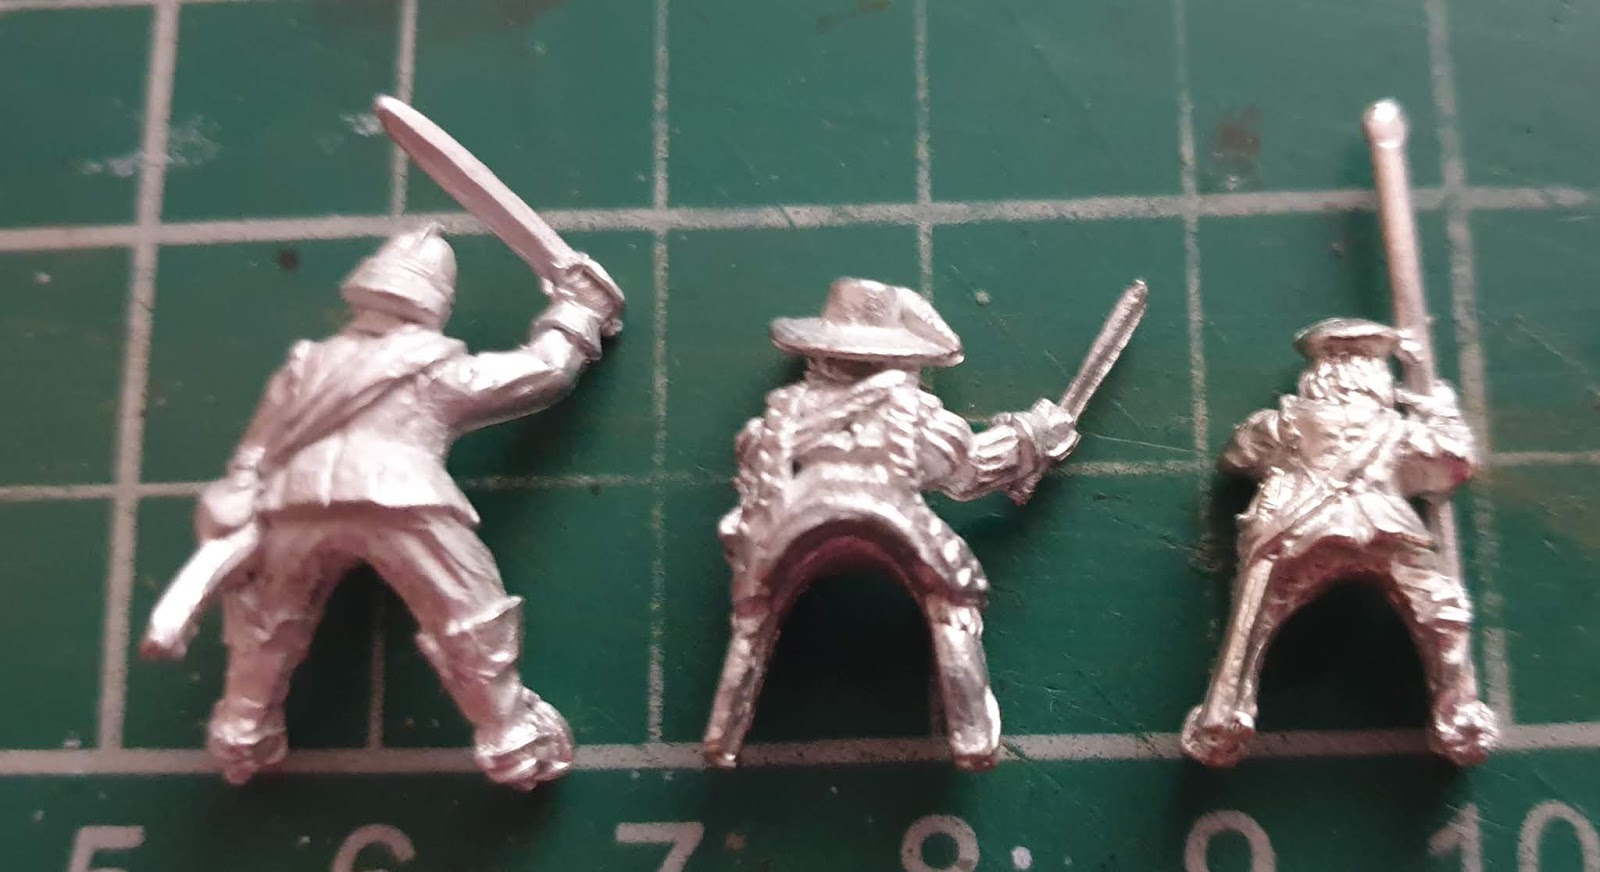 New! Musket Rests and Swine Feathers - Warlord Games